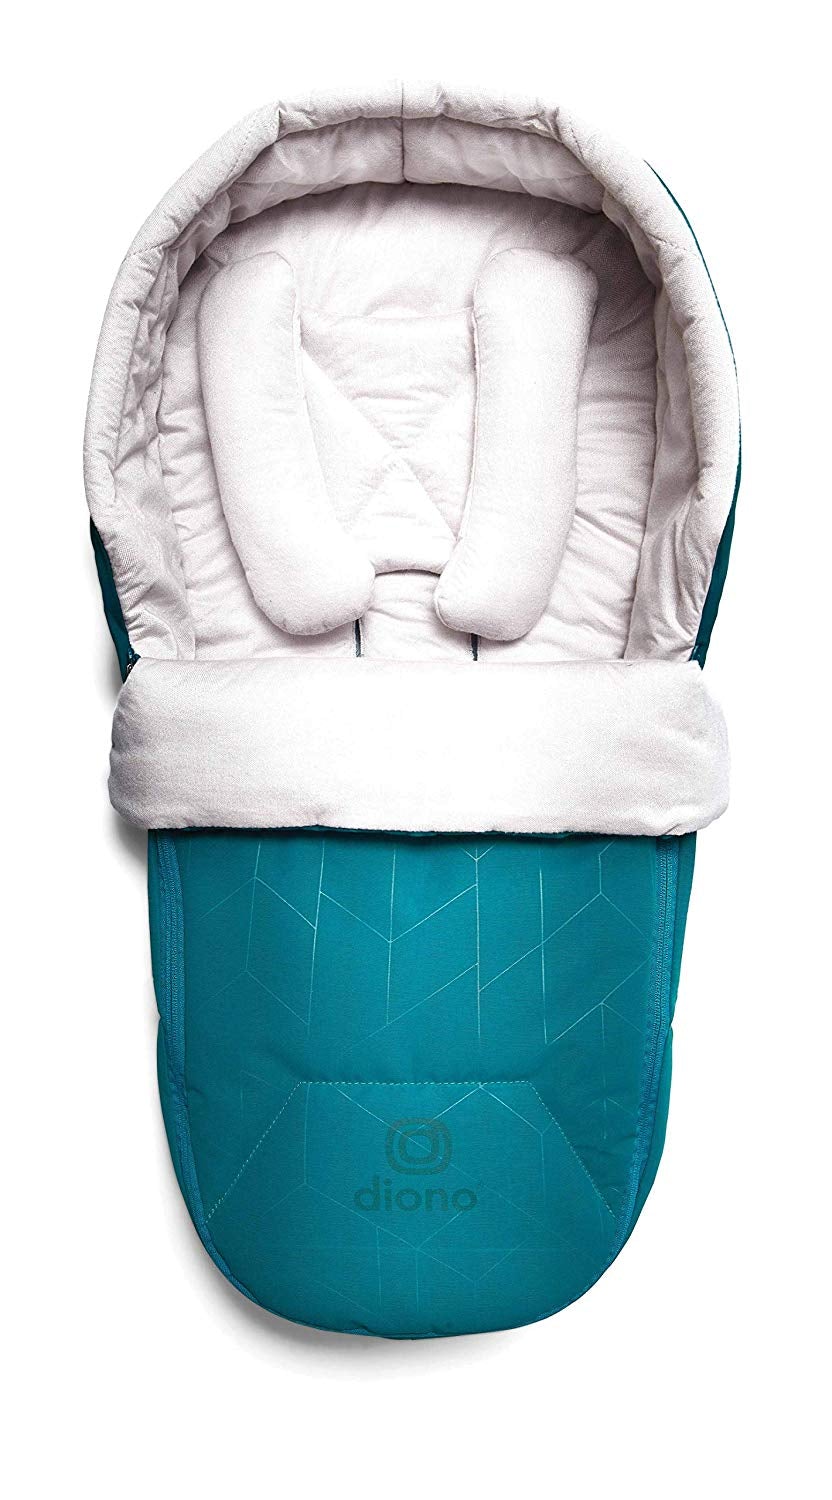 DIONO Editions and Luxe Newborn Pod - ANB Baby -$100 - $300